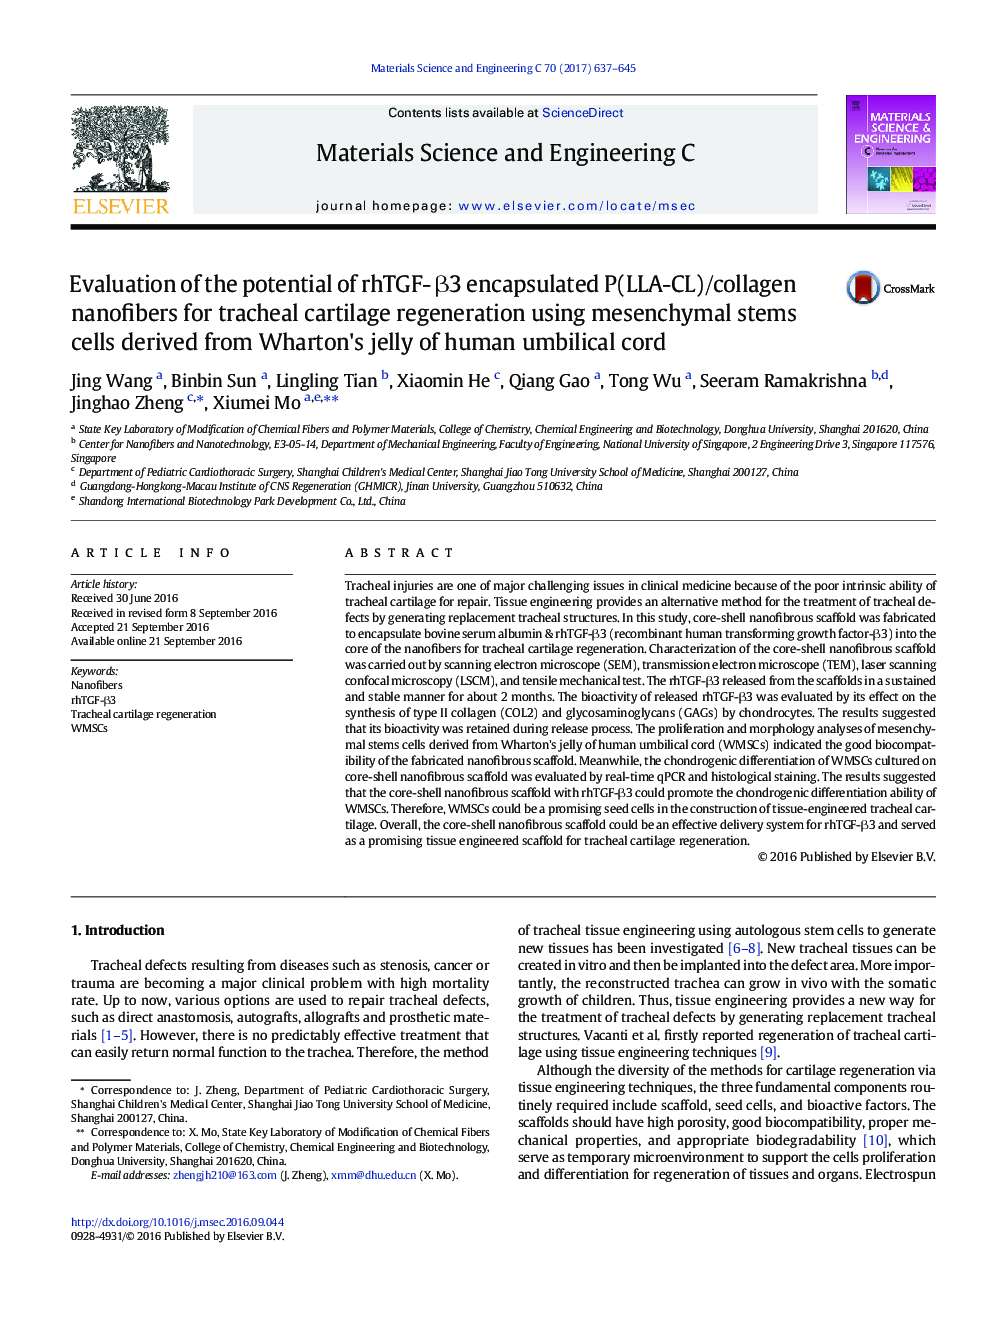 Evaluation of the potential of rhTGF- Î²3 encapsulated P(LLA-CL)/collagen nanofibers for tracheal cartilage regeneration using mesenchymal stems cells derived from Wharton's jelly of human umbilical cord